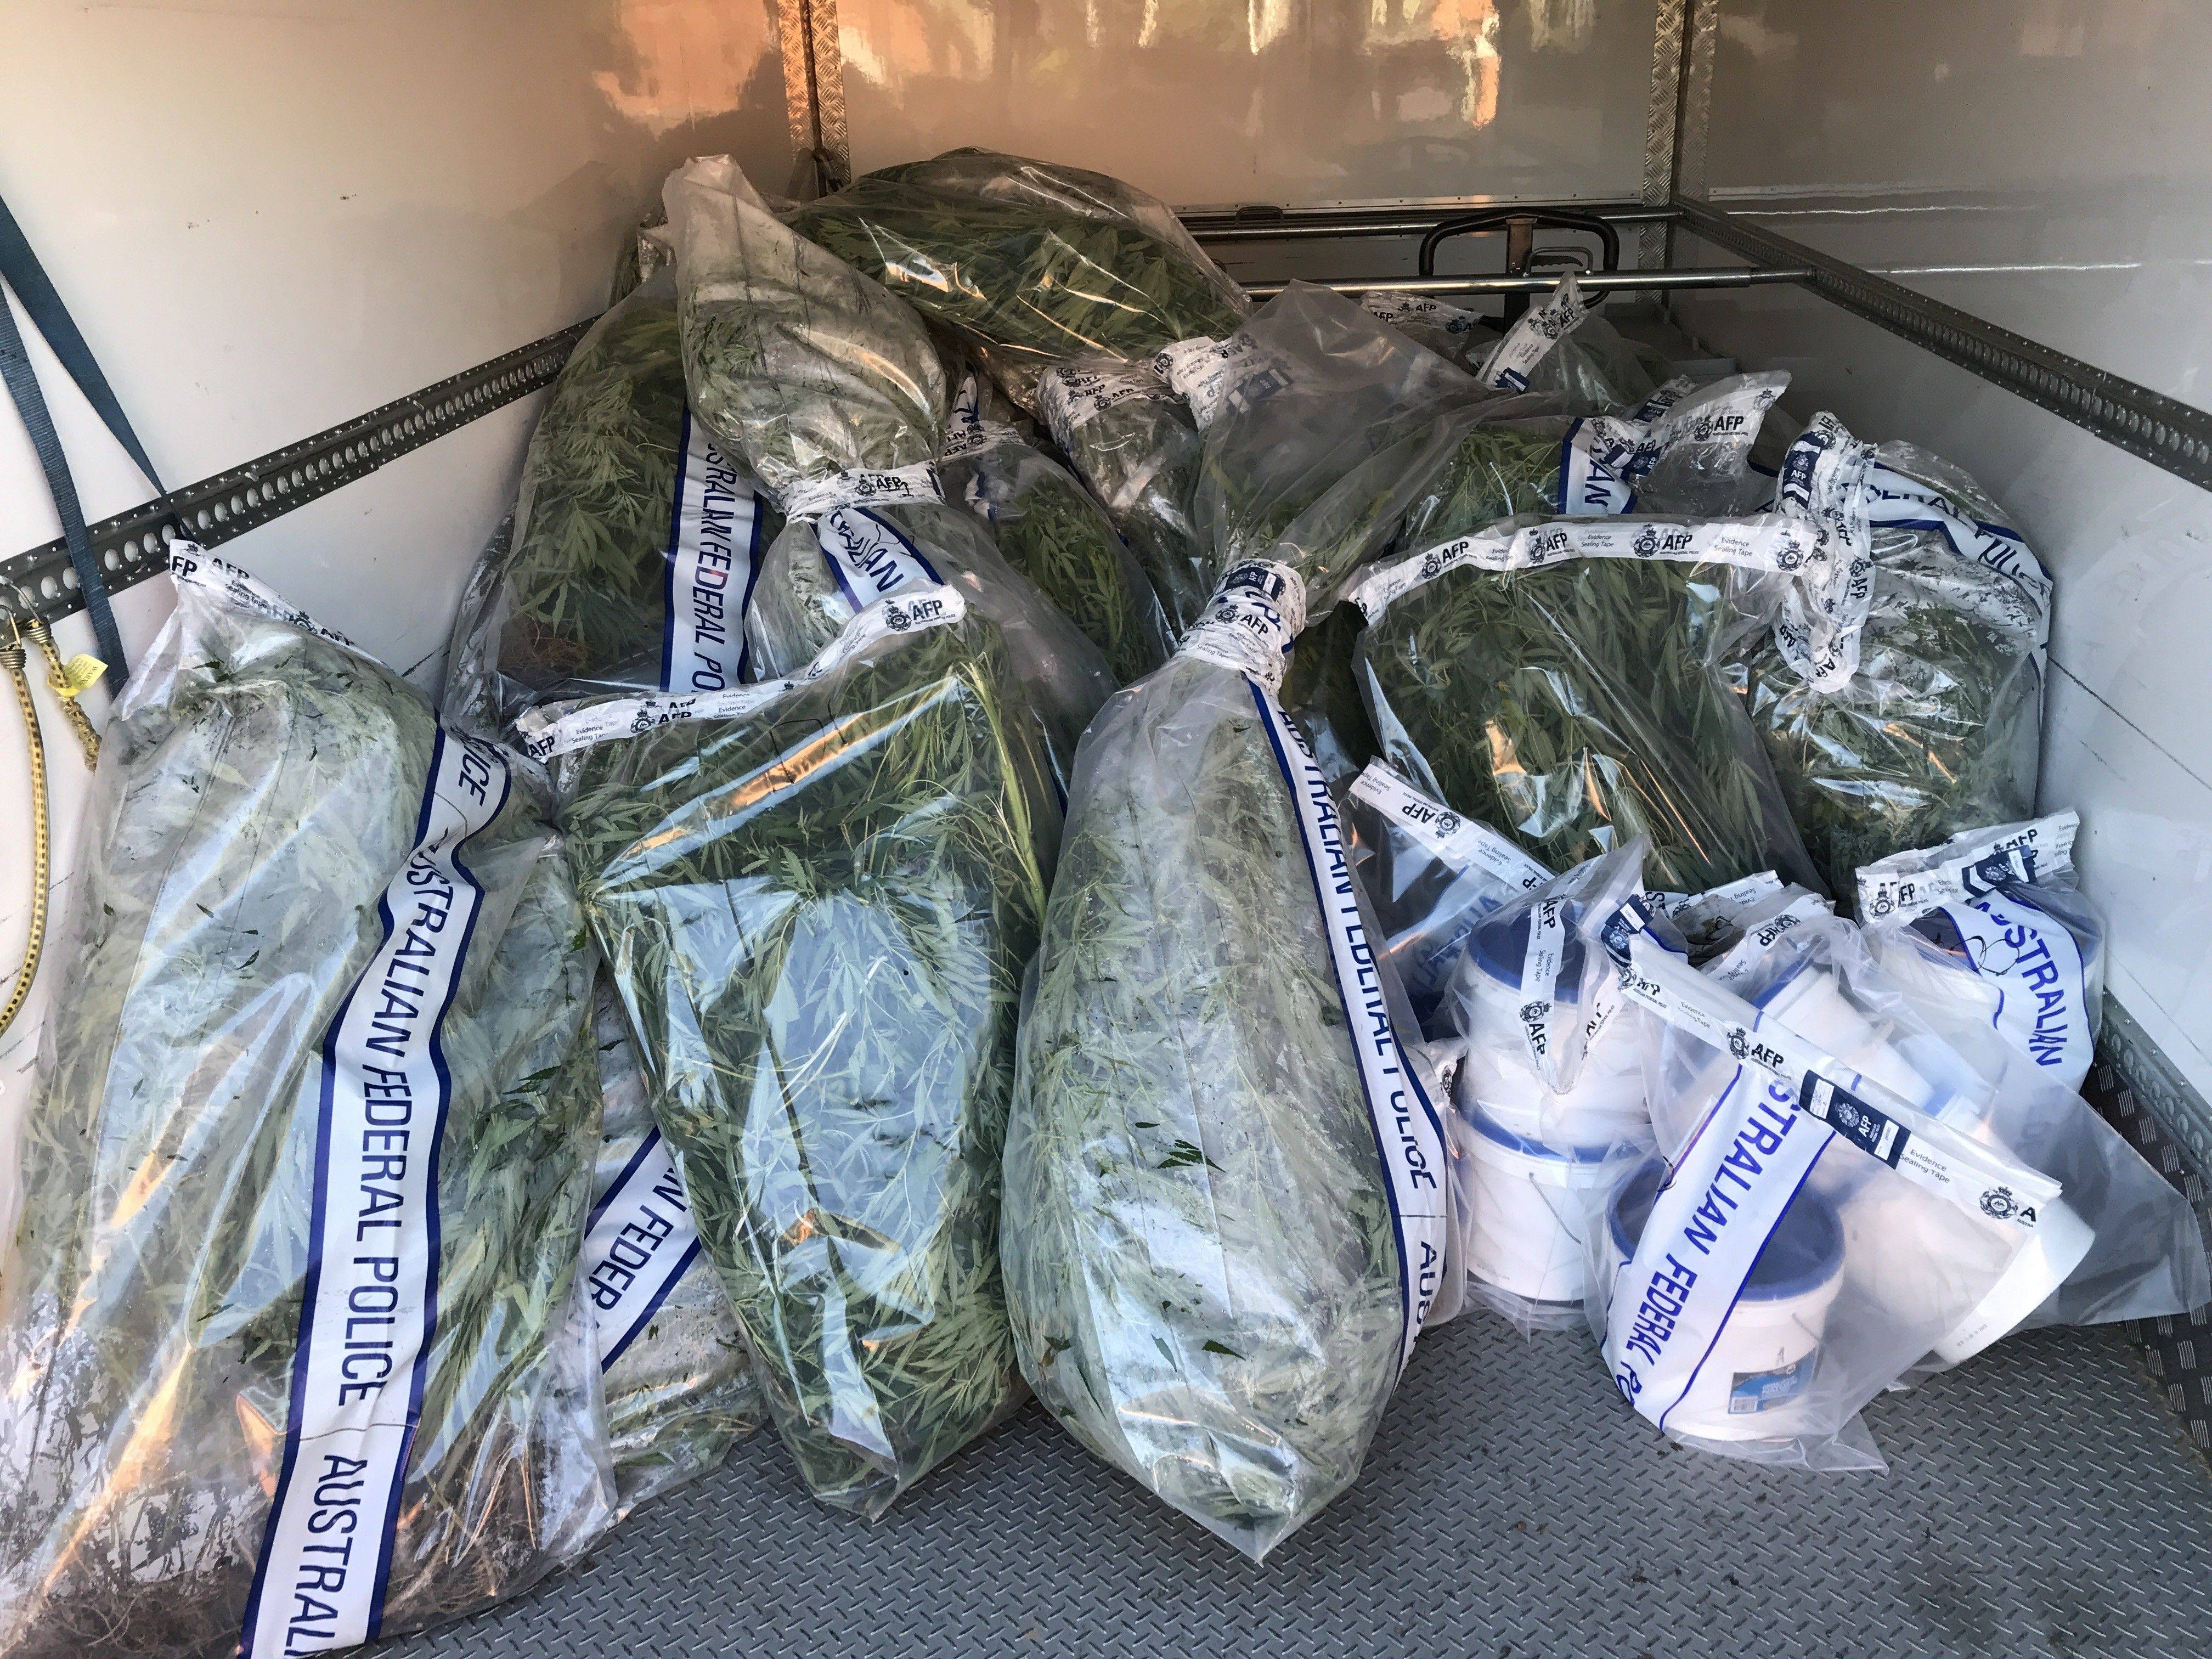 Police seize over 180 cannabis plants in Downer raid